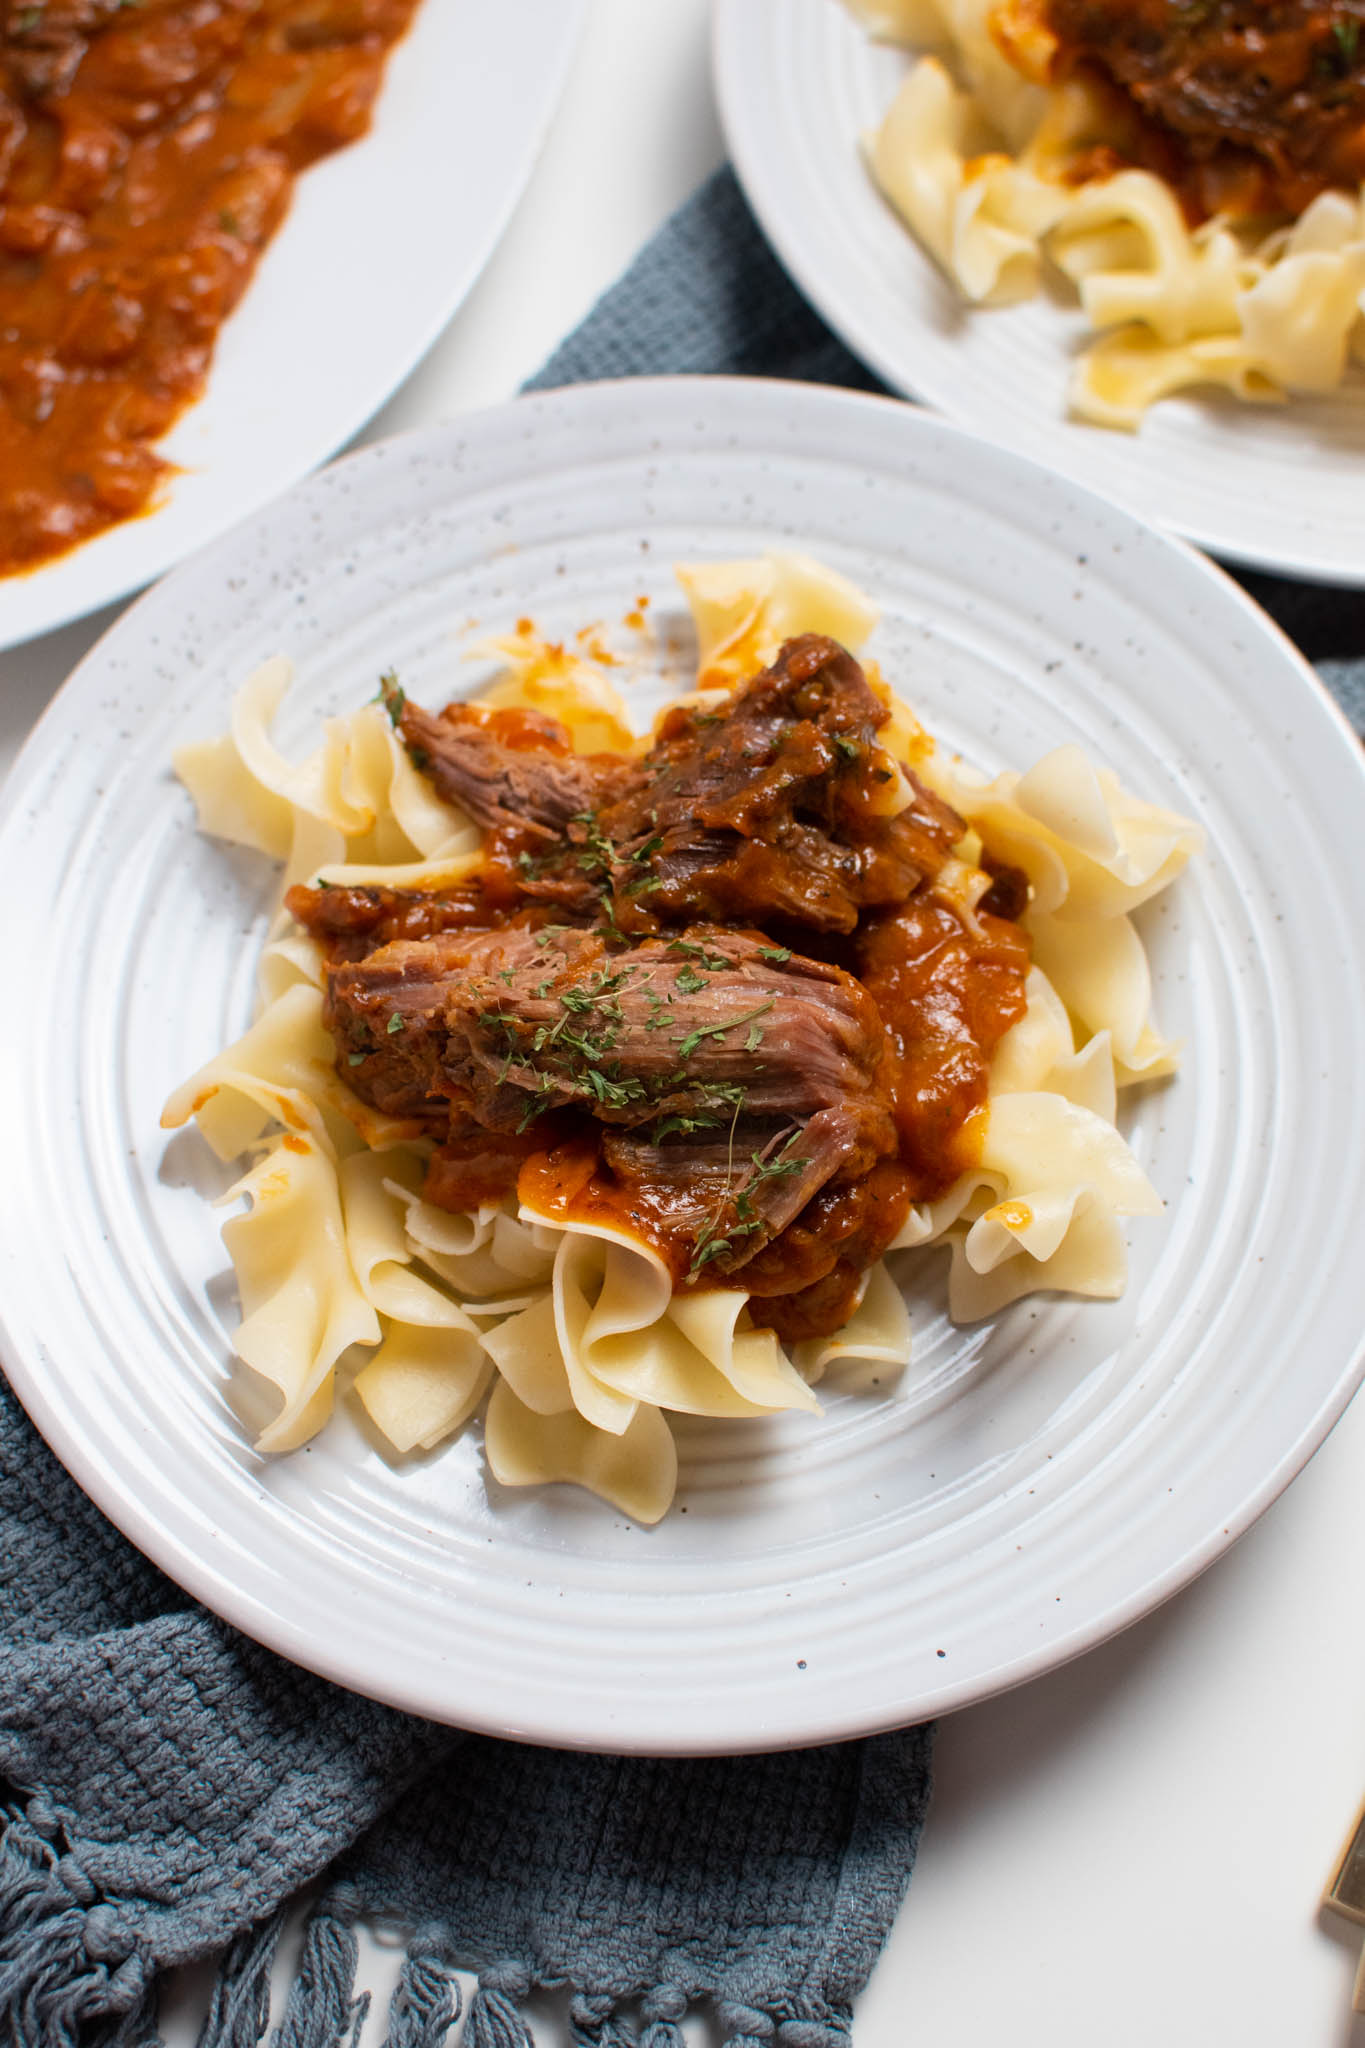 Italian pot roast and sauce over egg noodles on white plate.